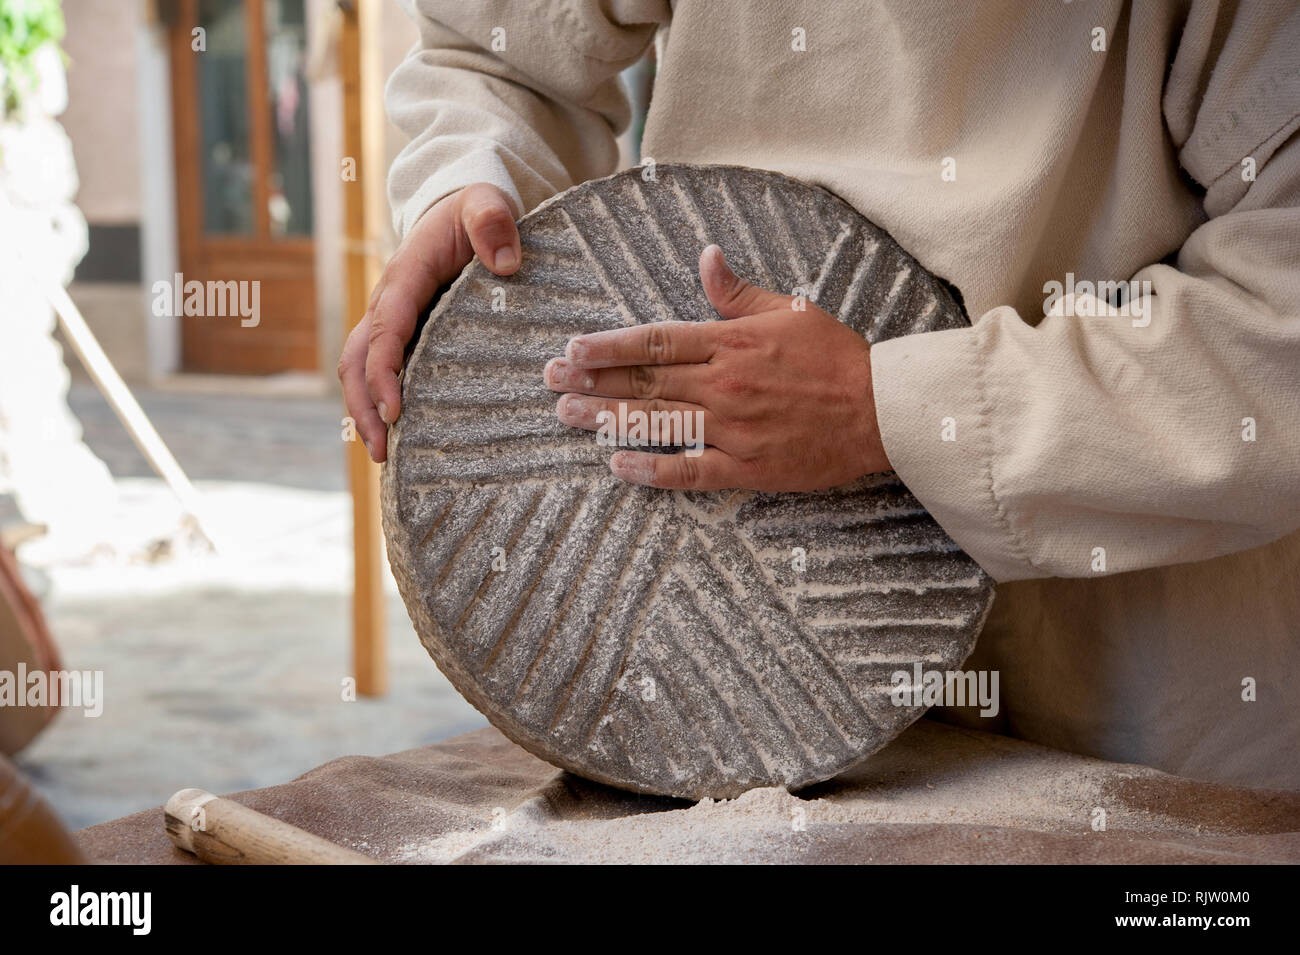 the miller remove the flour from old grinding stone Stock Photo